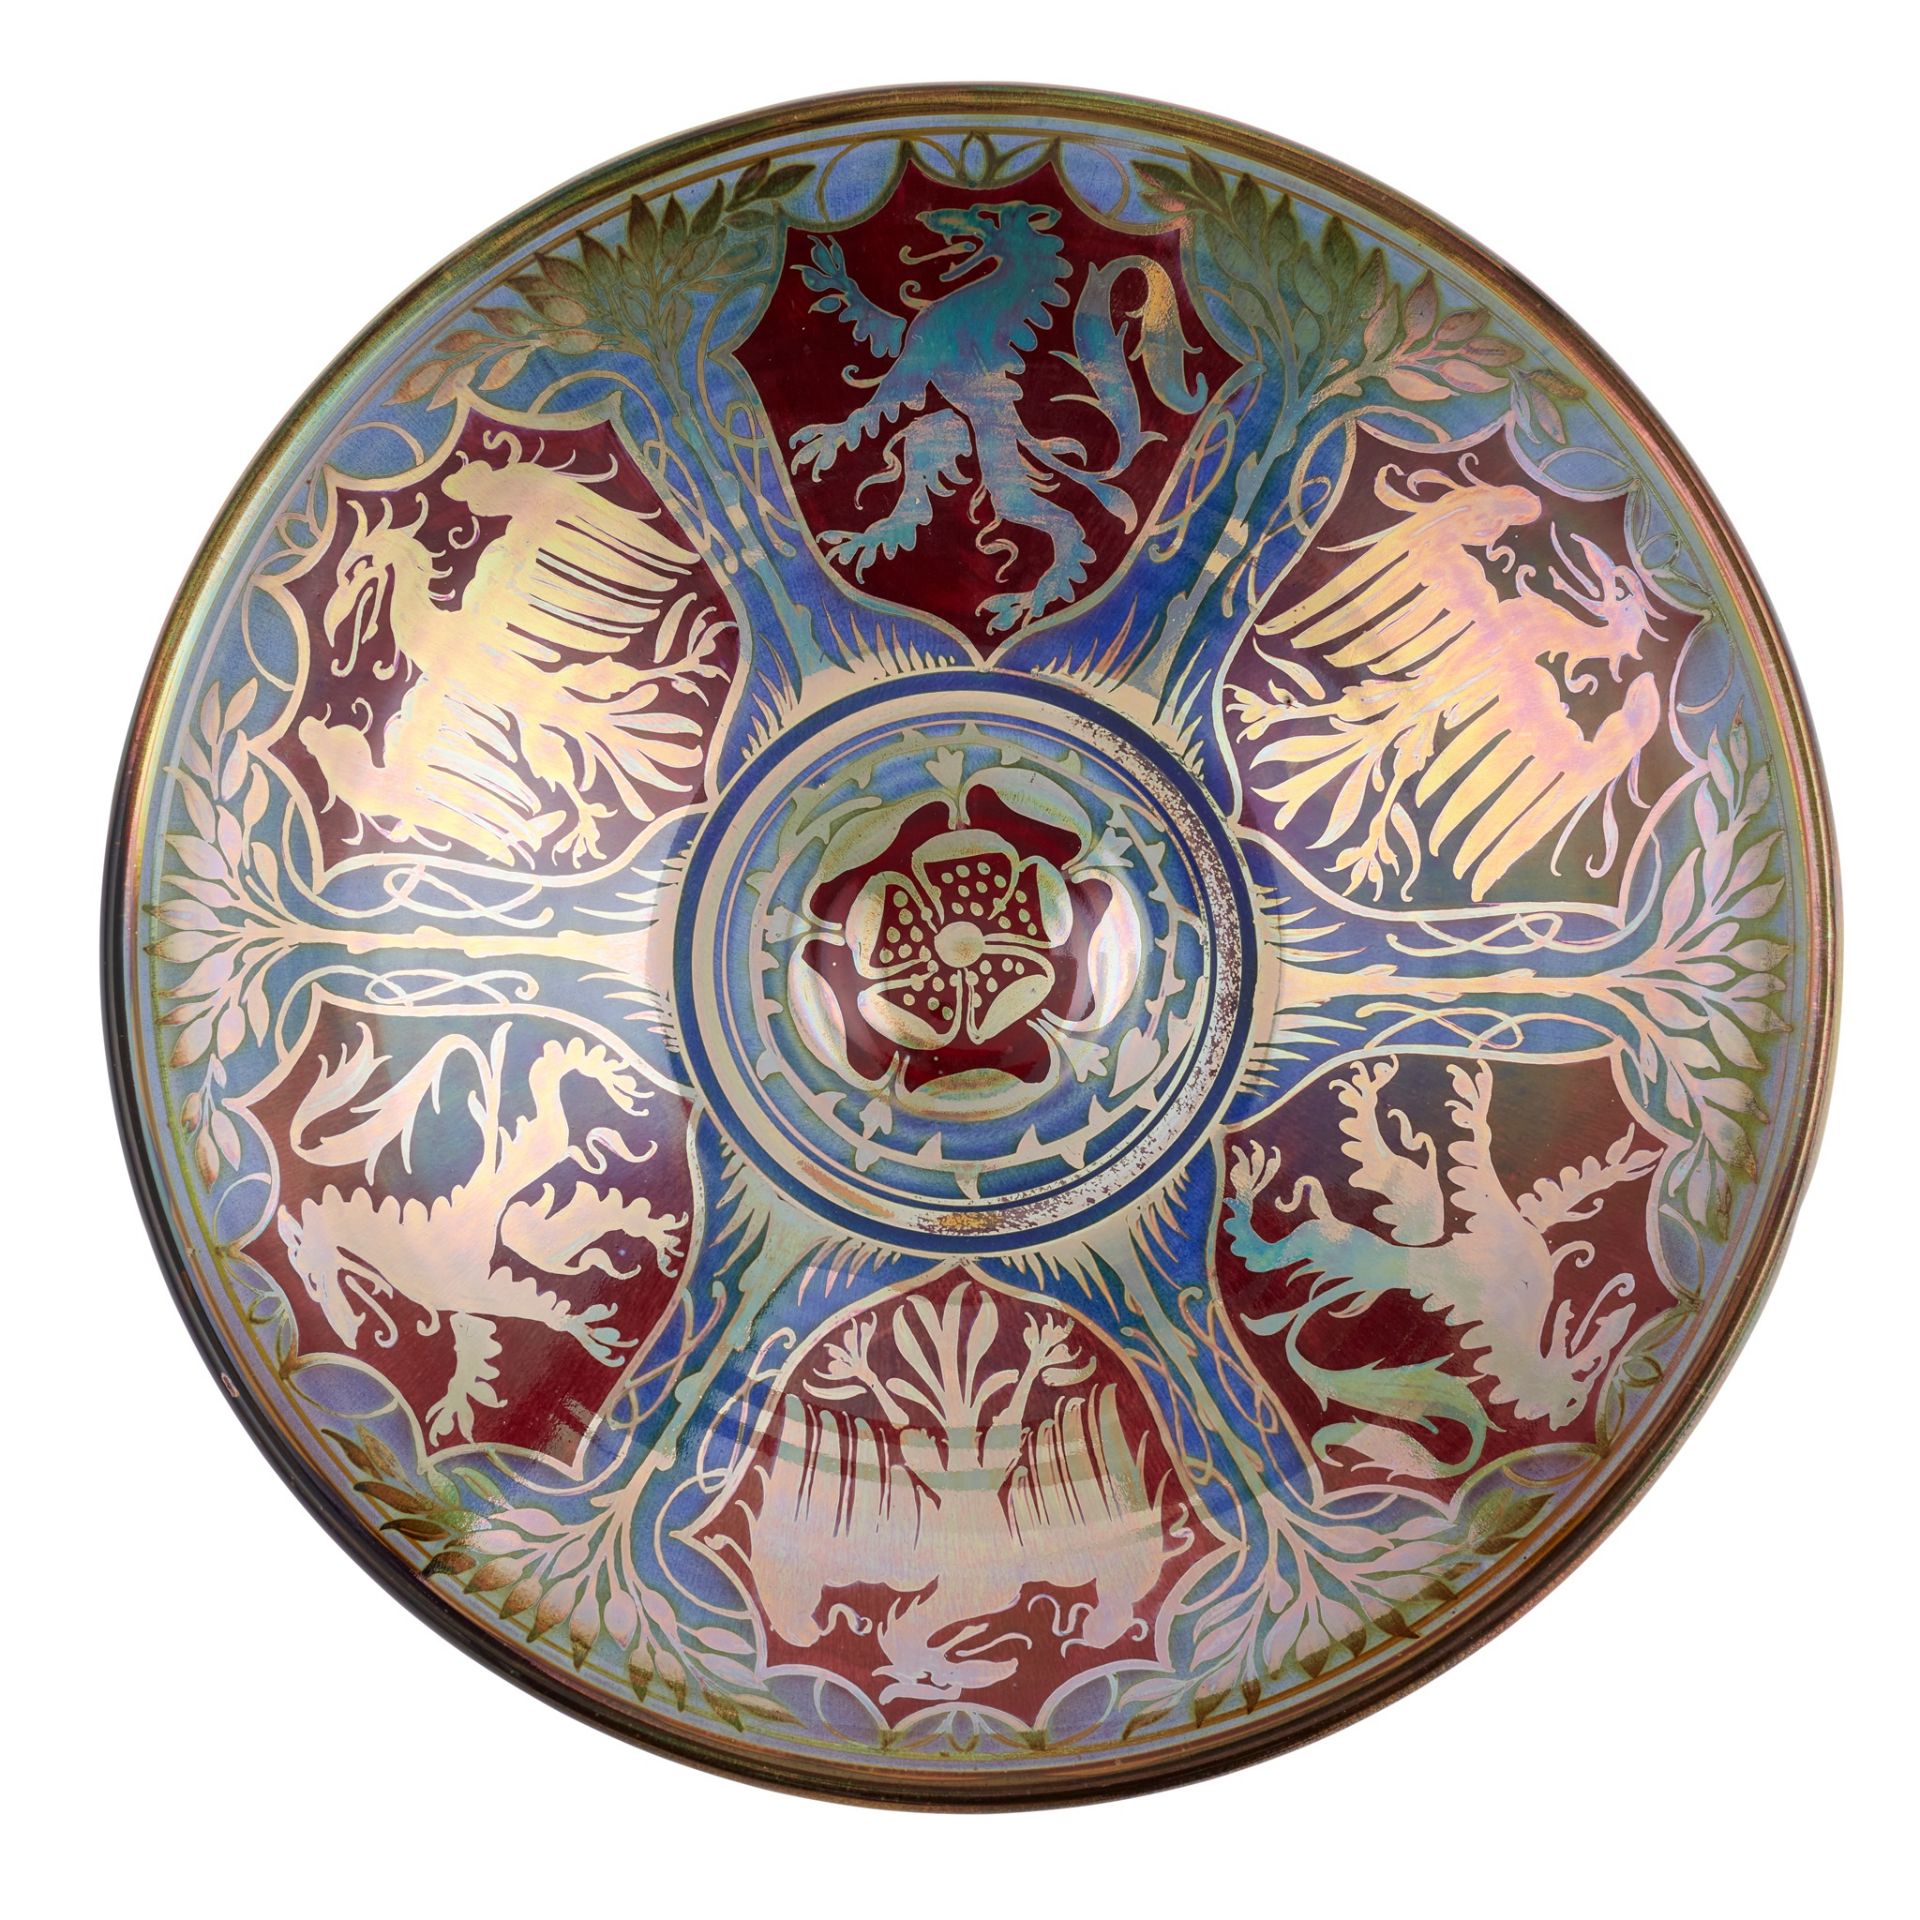 WILLIAM S. MYCOCK (1872-1950) FOR PILKINGTON’S TILE & POTTERY CO. LUSTRE CHARGER, DATED 1910 - Image 3 of 3